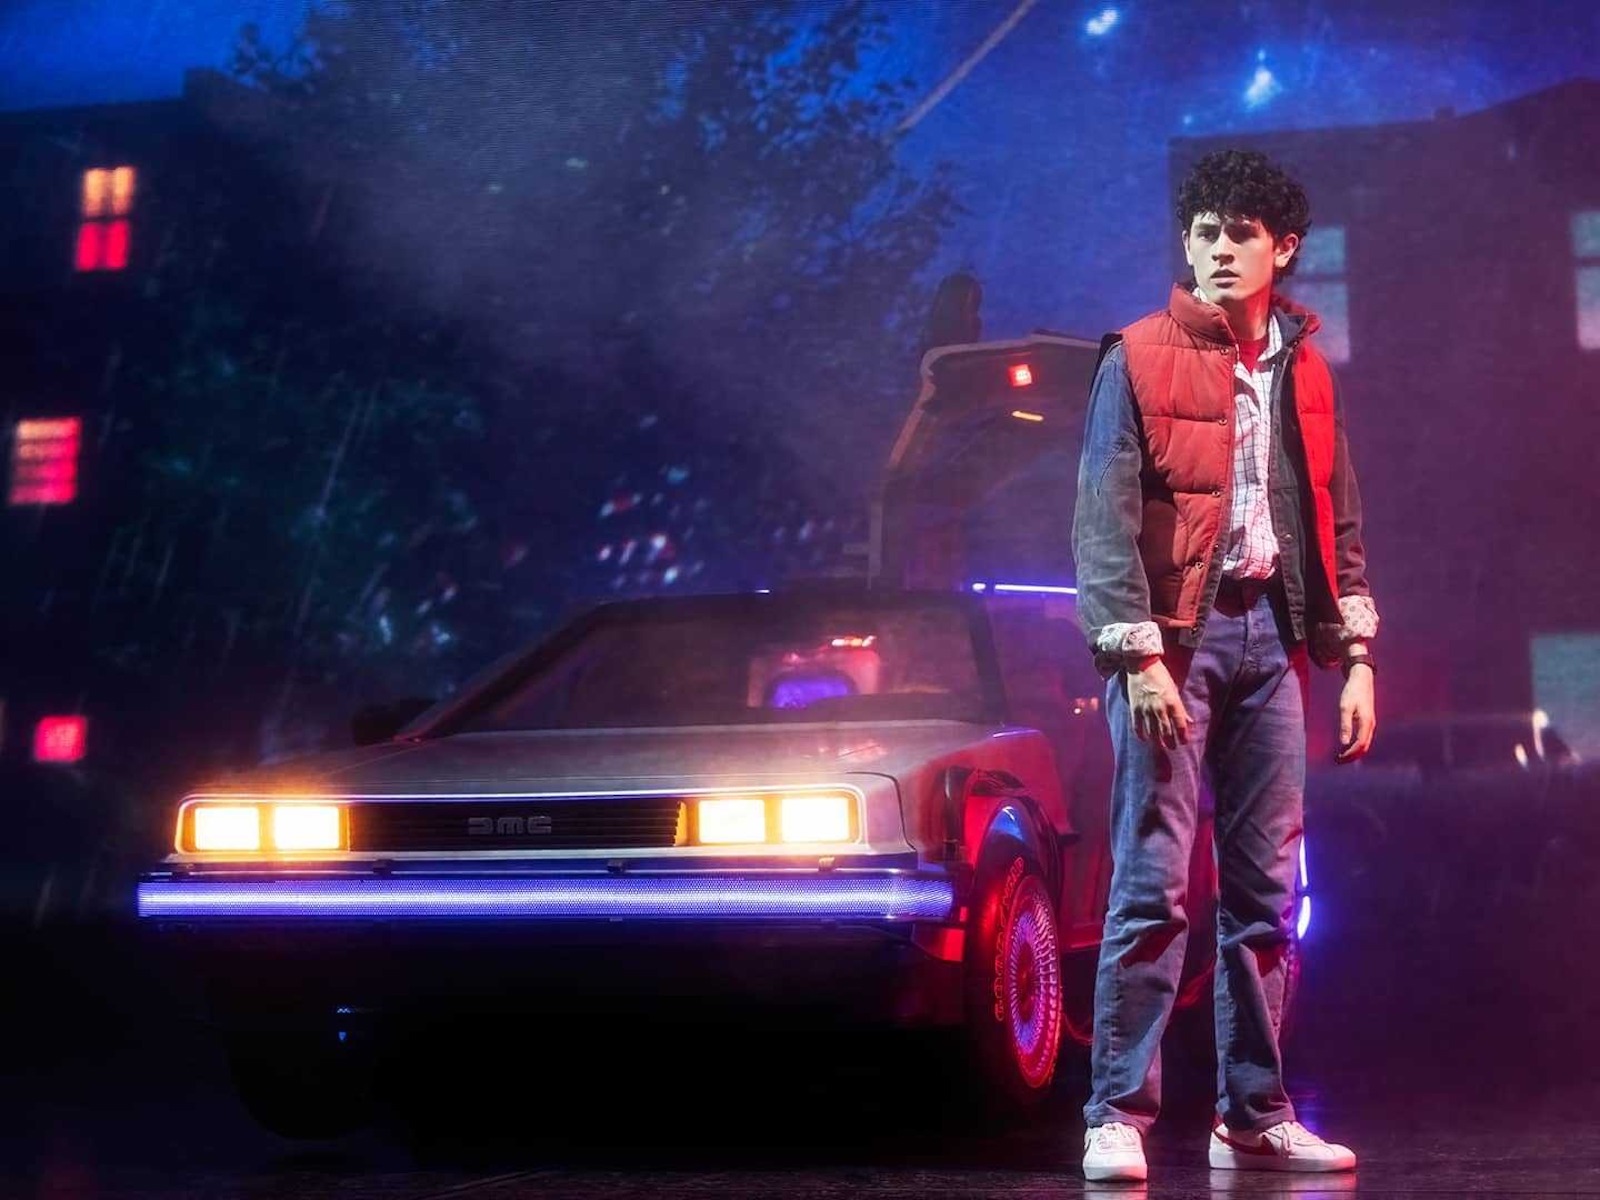 Back to the Future Musical: Michael J Fox Attends Broadway Show